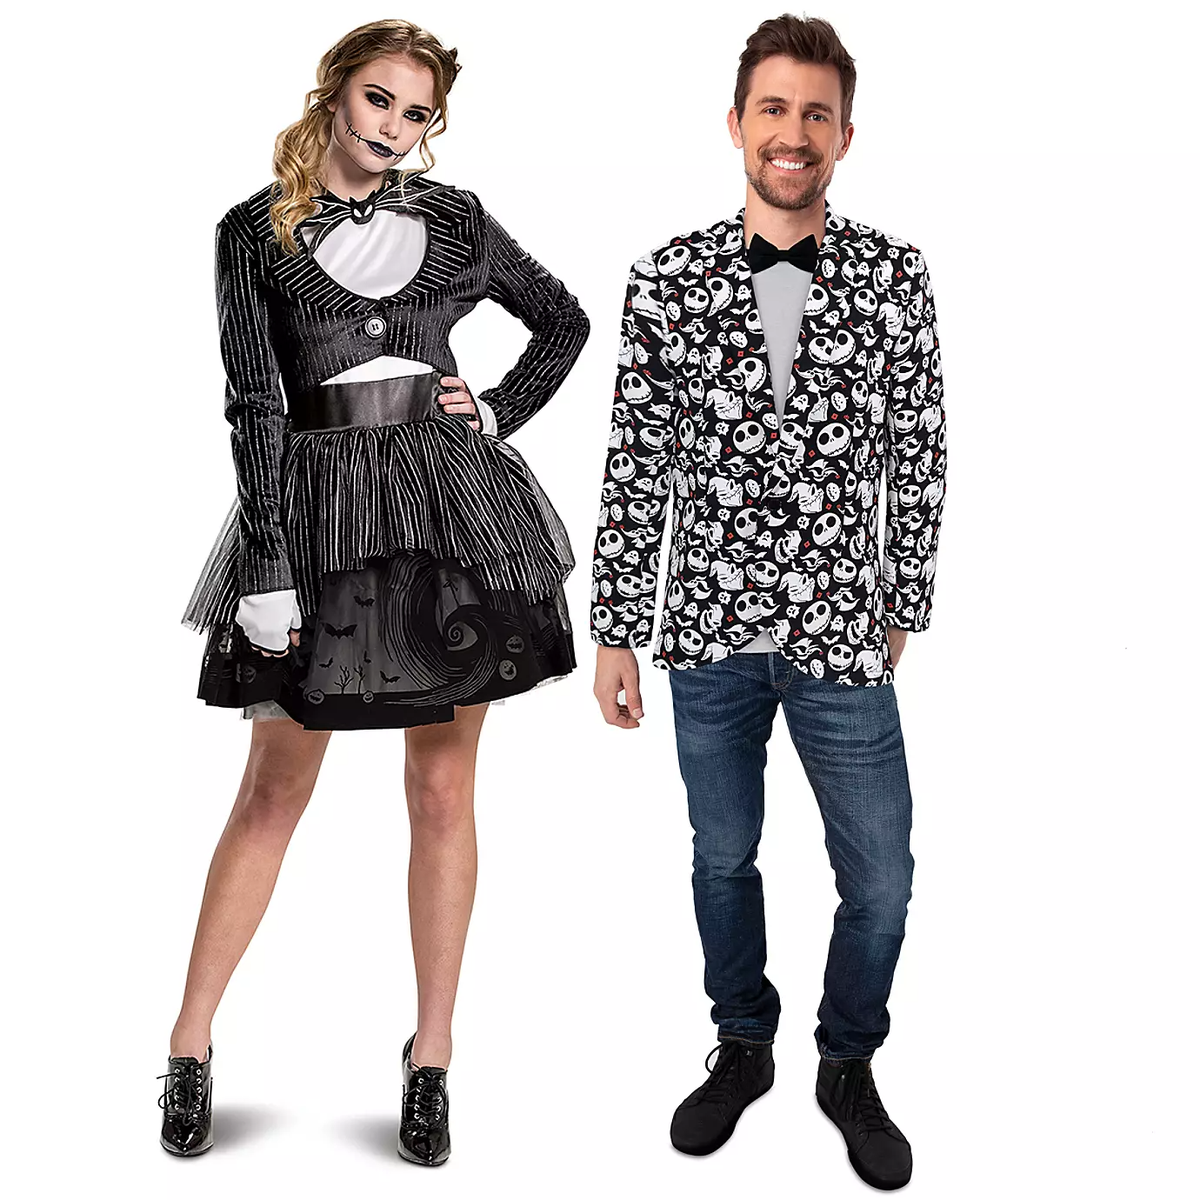 The Nightmare Before Christmas Costume Collection for Adults